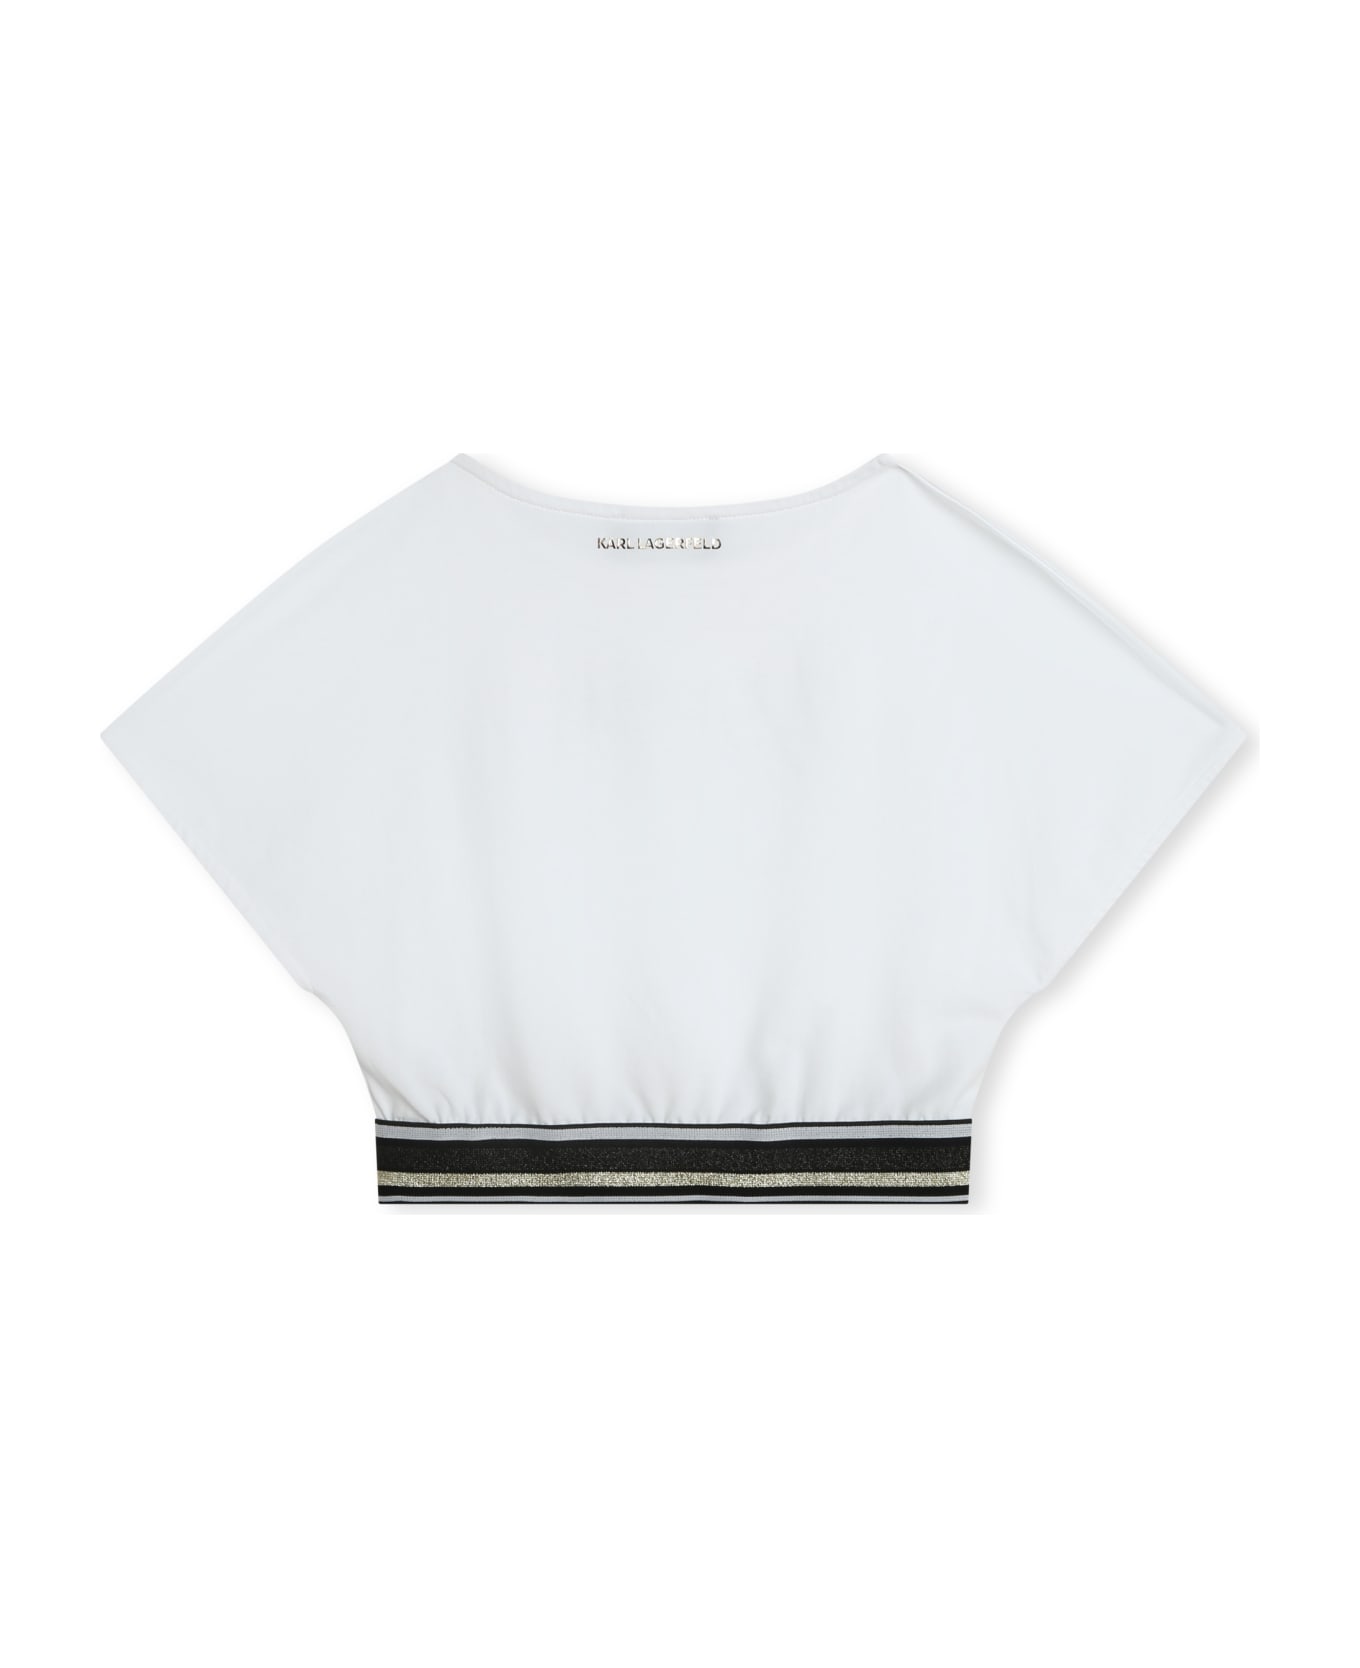 Karl Lagerfeld Kids T-shirt Con Stampa - White Tシャツ＆ポロシャツ